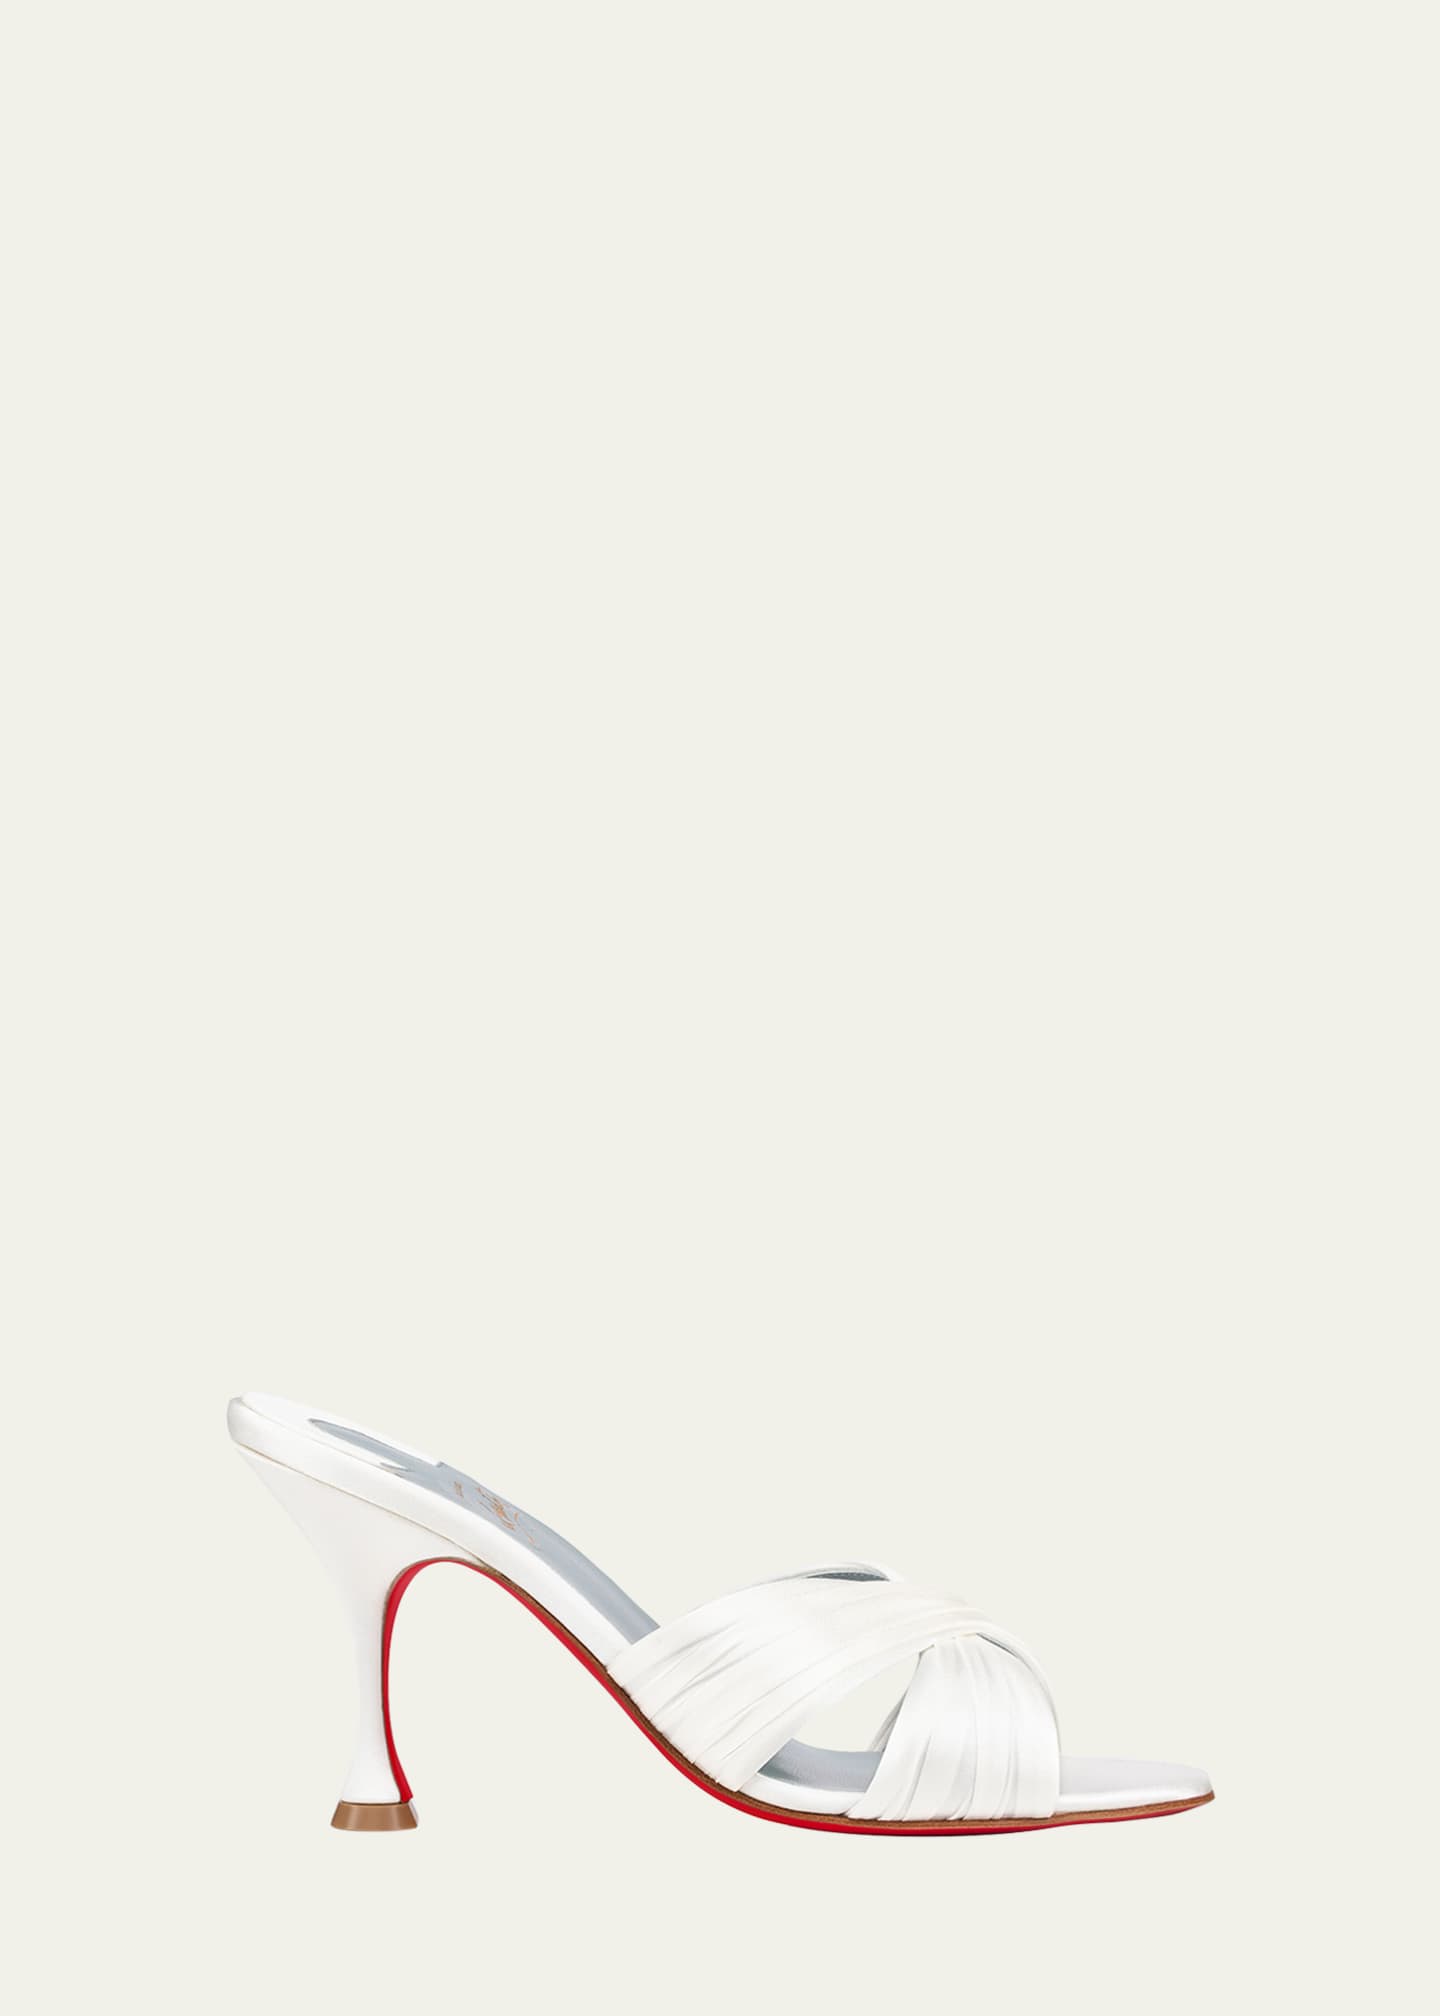 Christian Louboutin Nicol is Back Red Sole High-Heel Sandals -